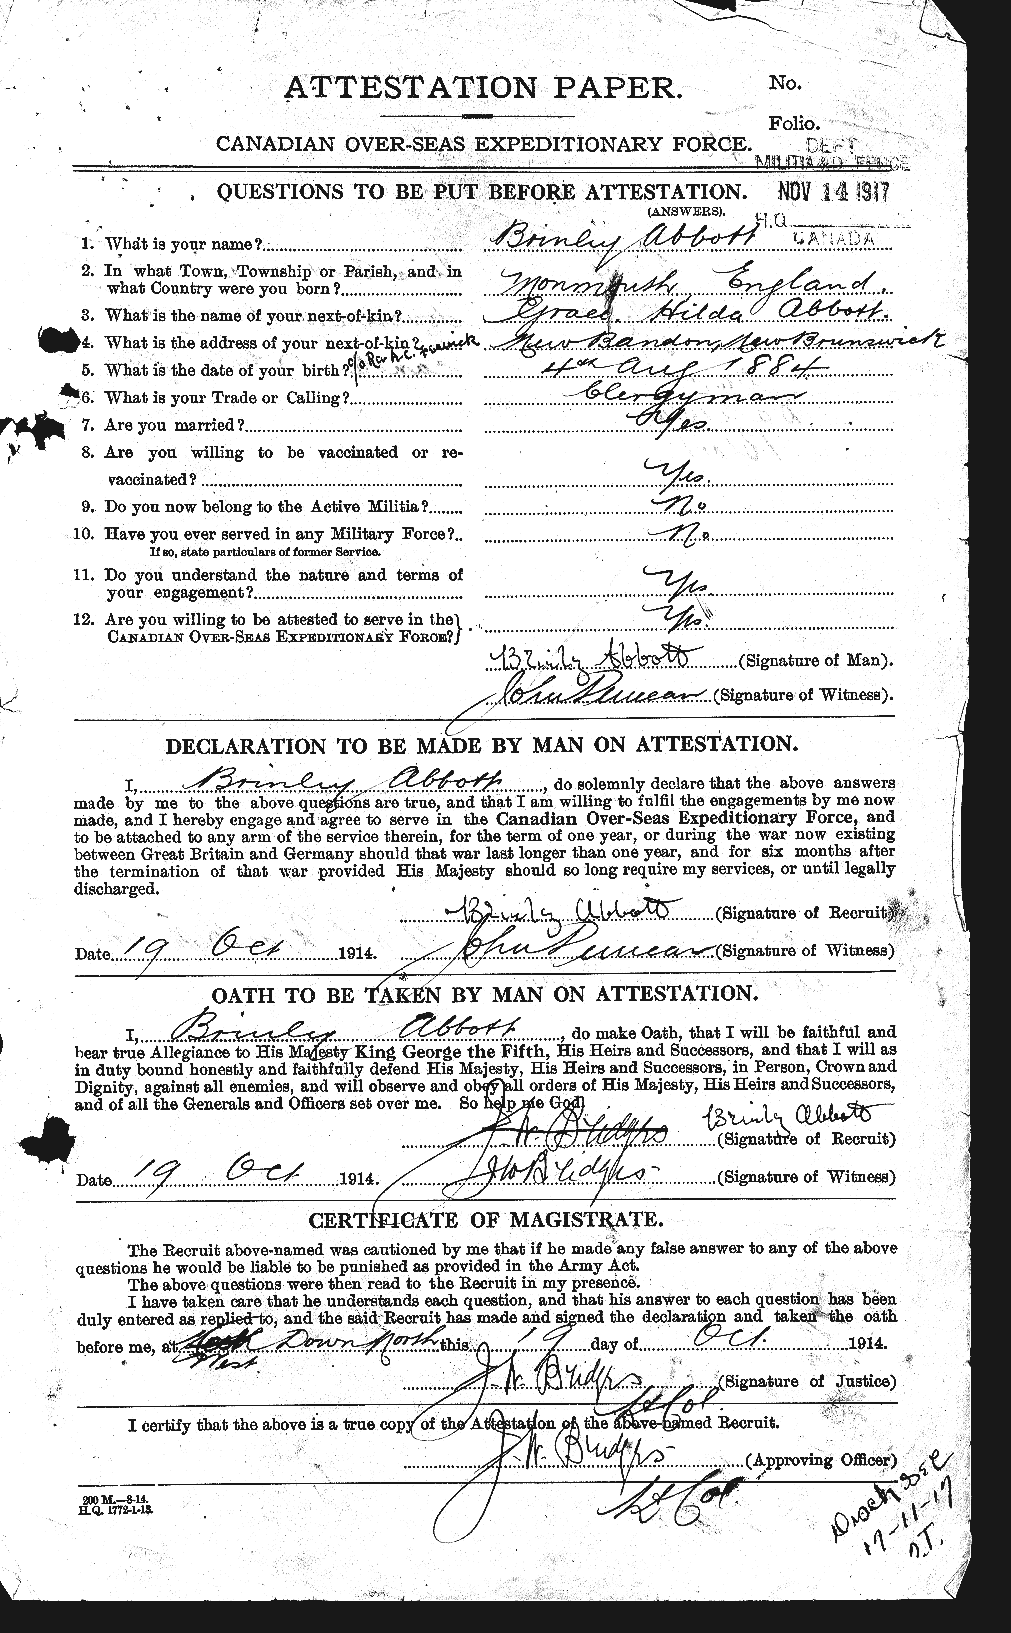 Personnel Records of the First World War - CEF 200823a